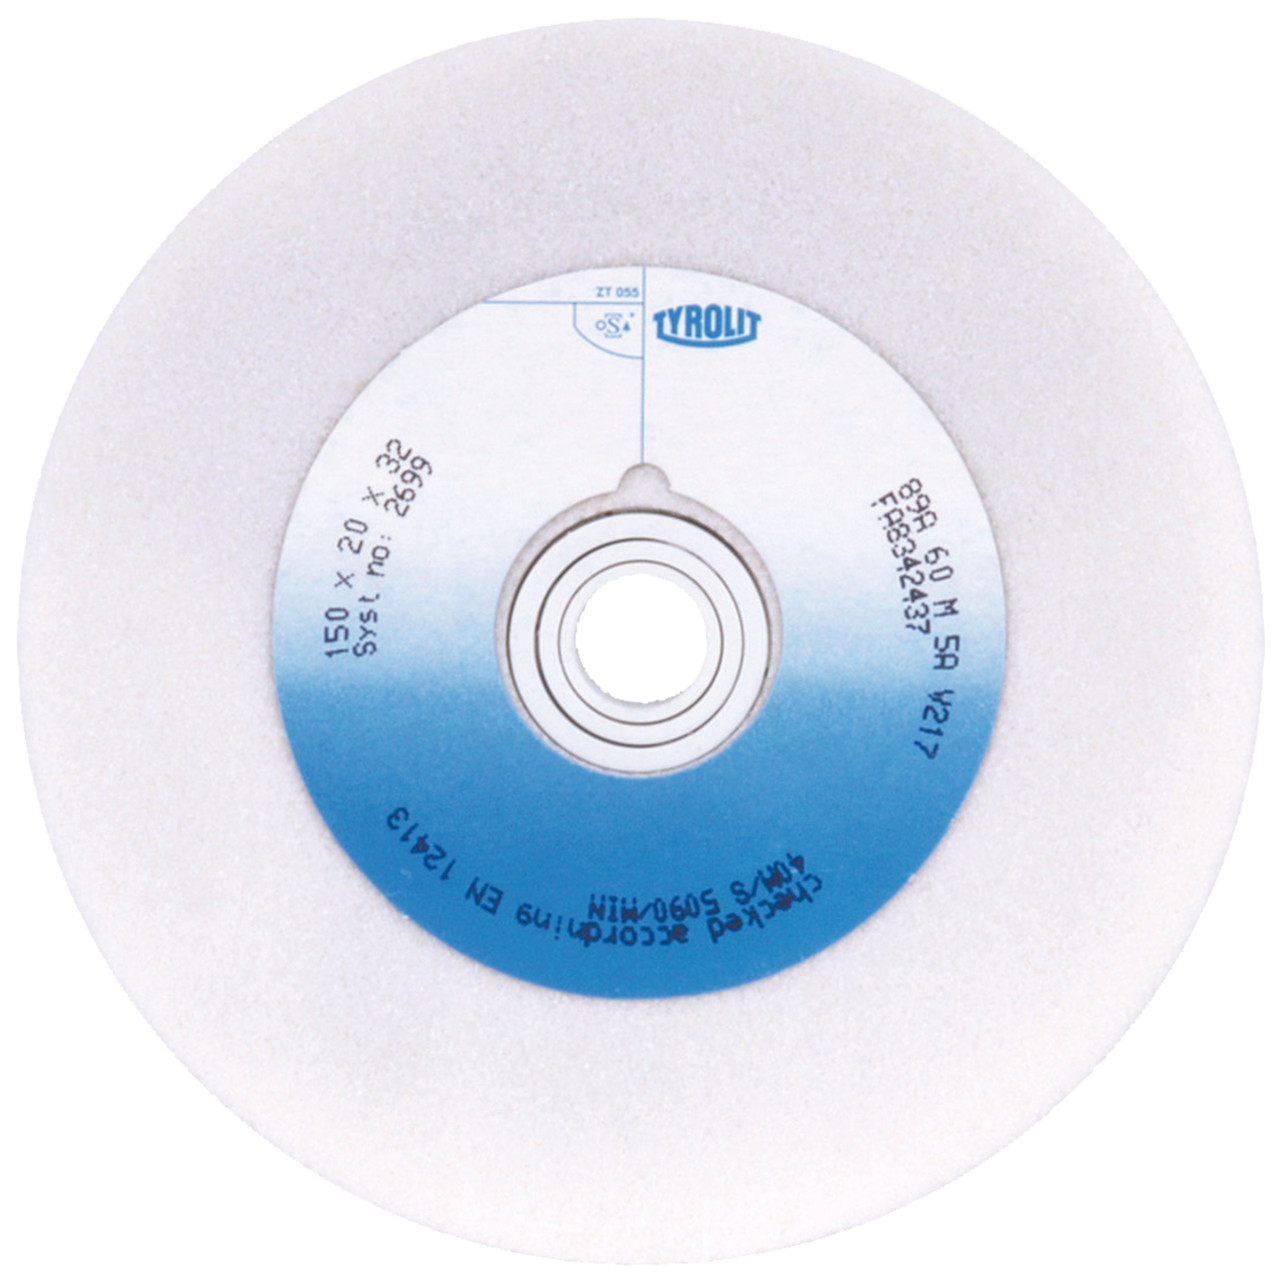 TYROLIT conventional ceramic grinding wheels DxDxH 150x25x32 For high-alloy steels and HSS, shape: 1, Art. 2762